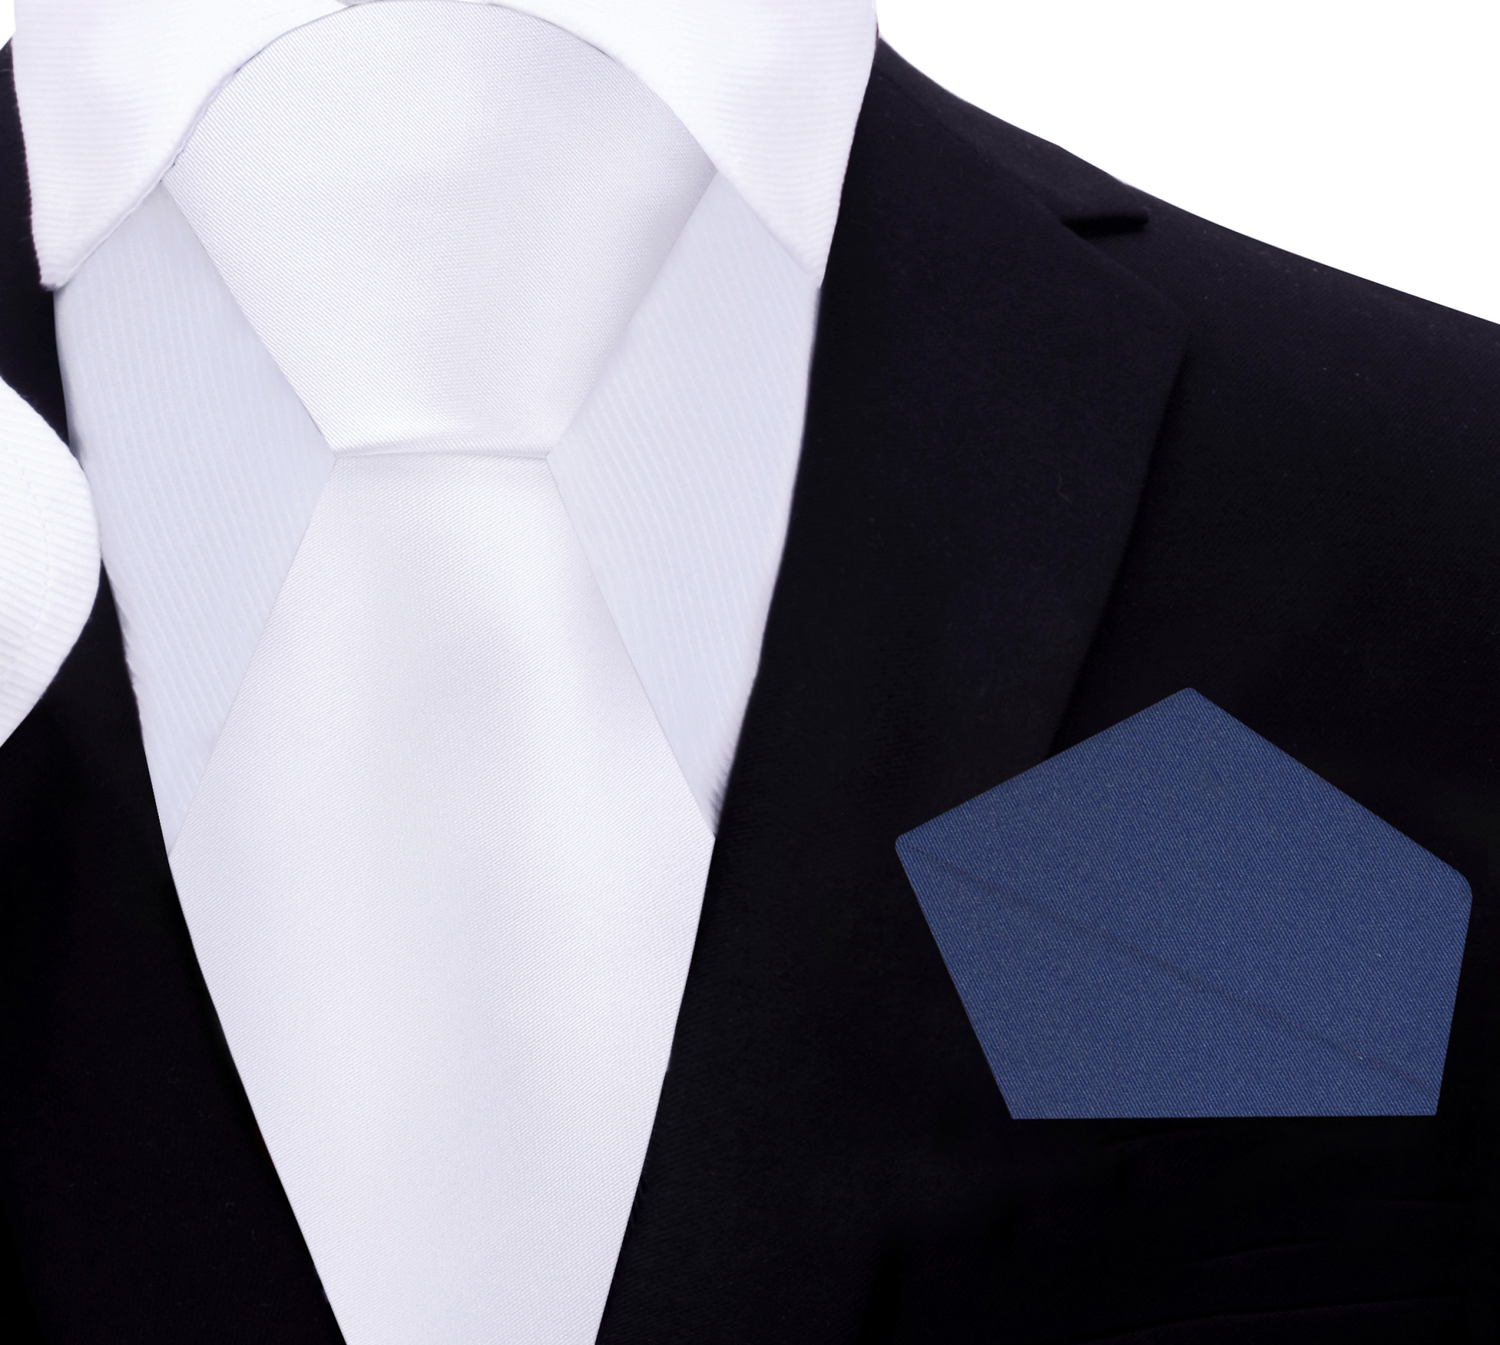 Solid White Tie with Blue Square